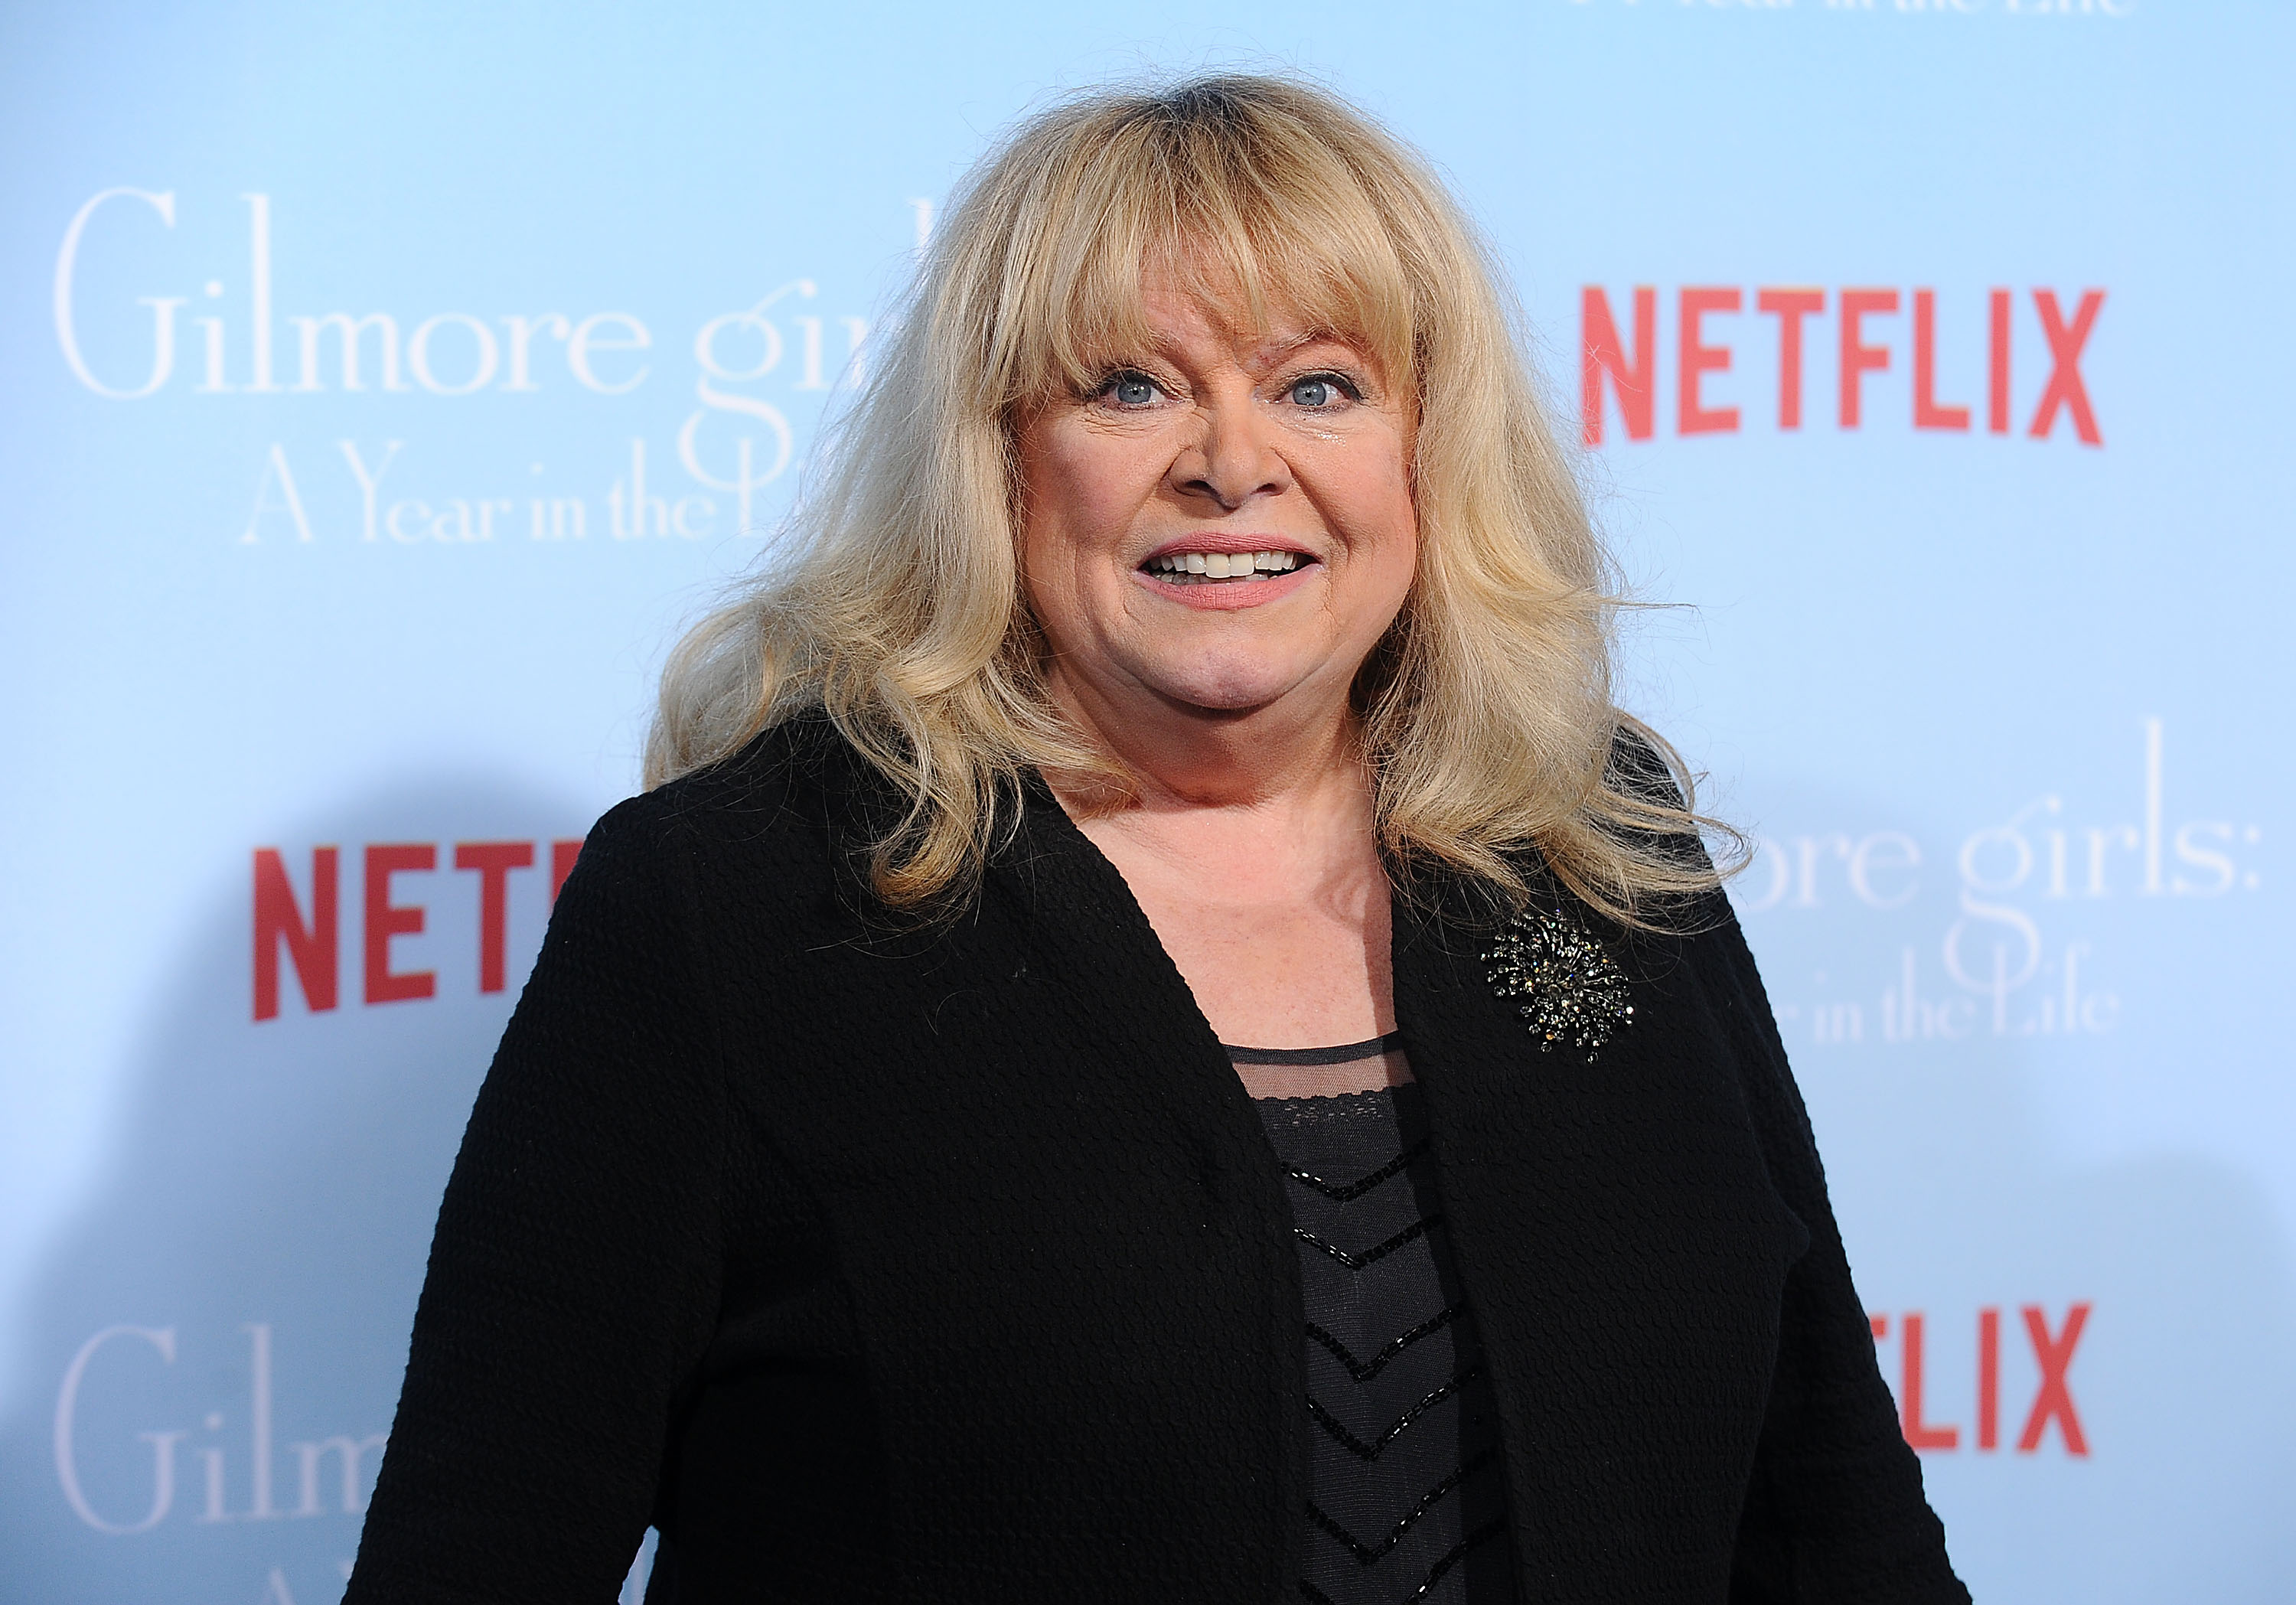 Sally Struthers at the premiere of "Gilmore Girls: A Year in the Life" at Regency Bruin Theatre on November 18, 2016  